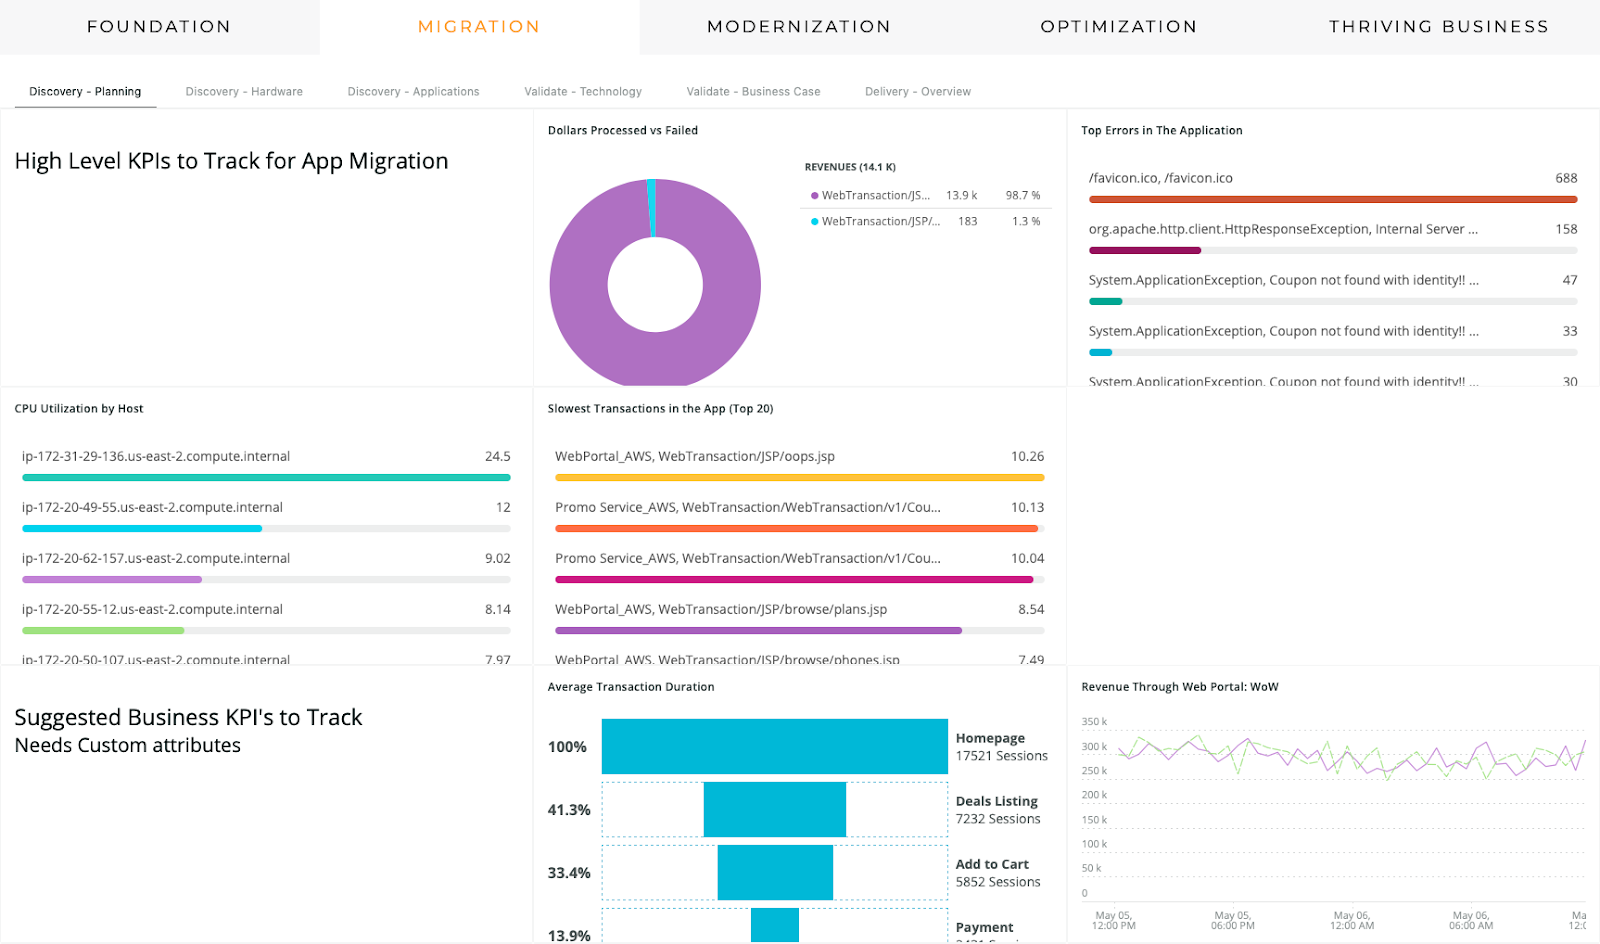 New Relic Dashboard demonstrating High Level KPIs to track